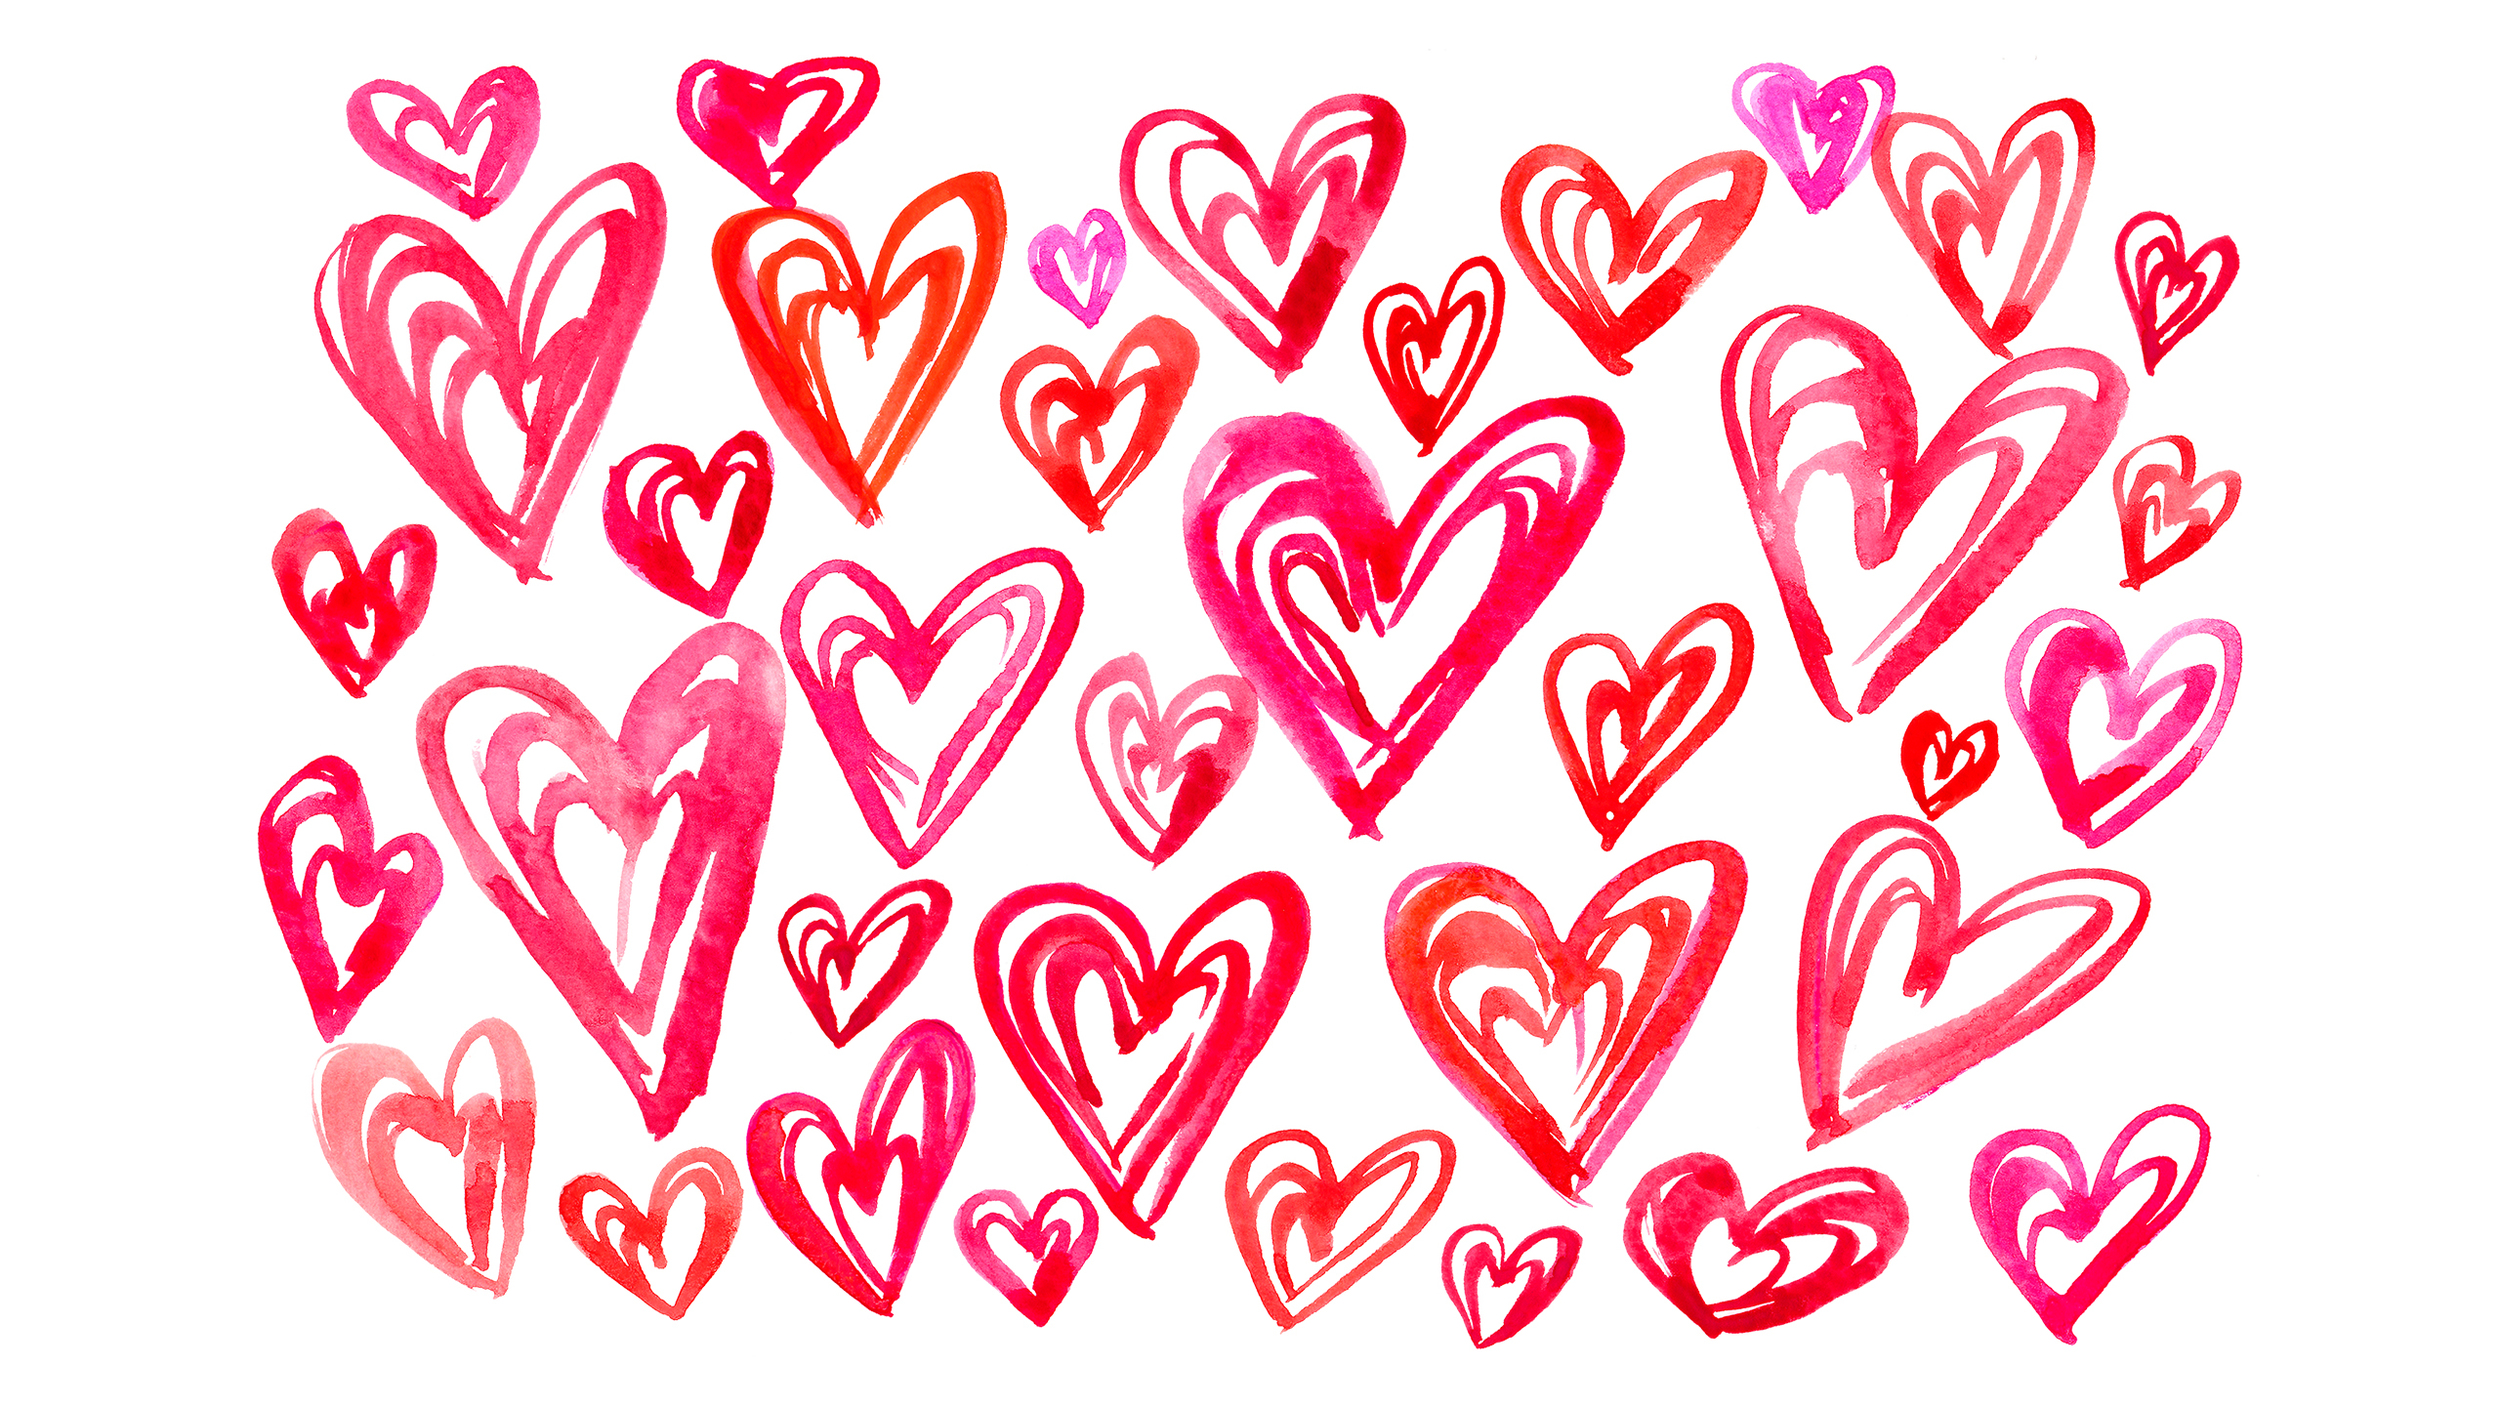 Find more Happy Valentines Day Illustration and Surface Design Bryna Shield...